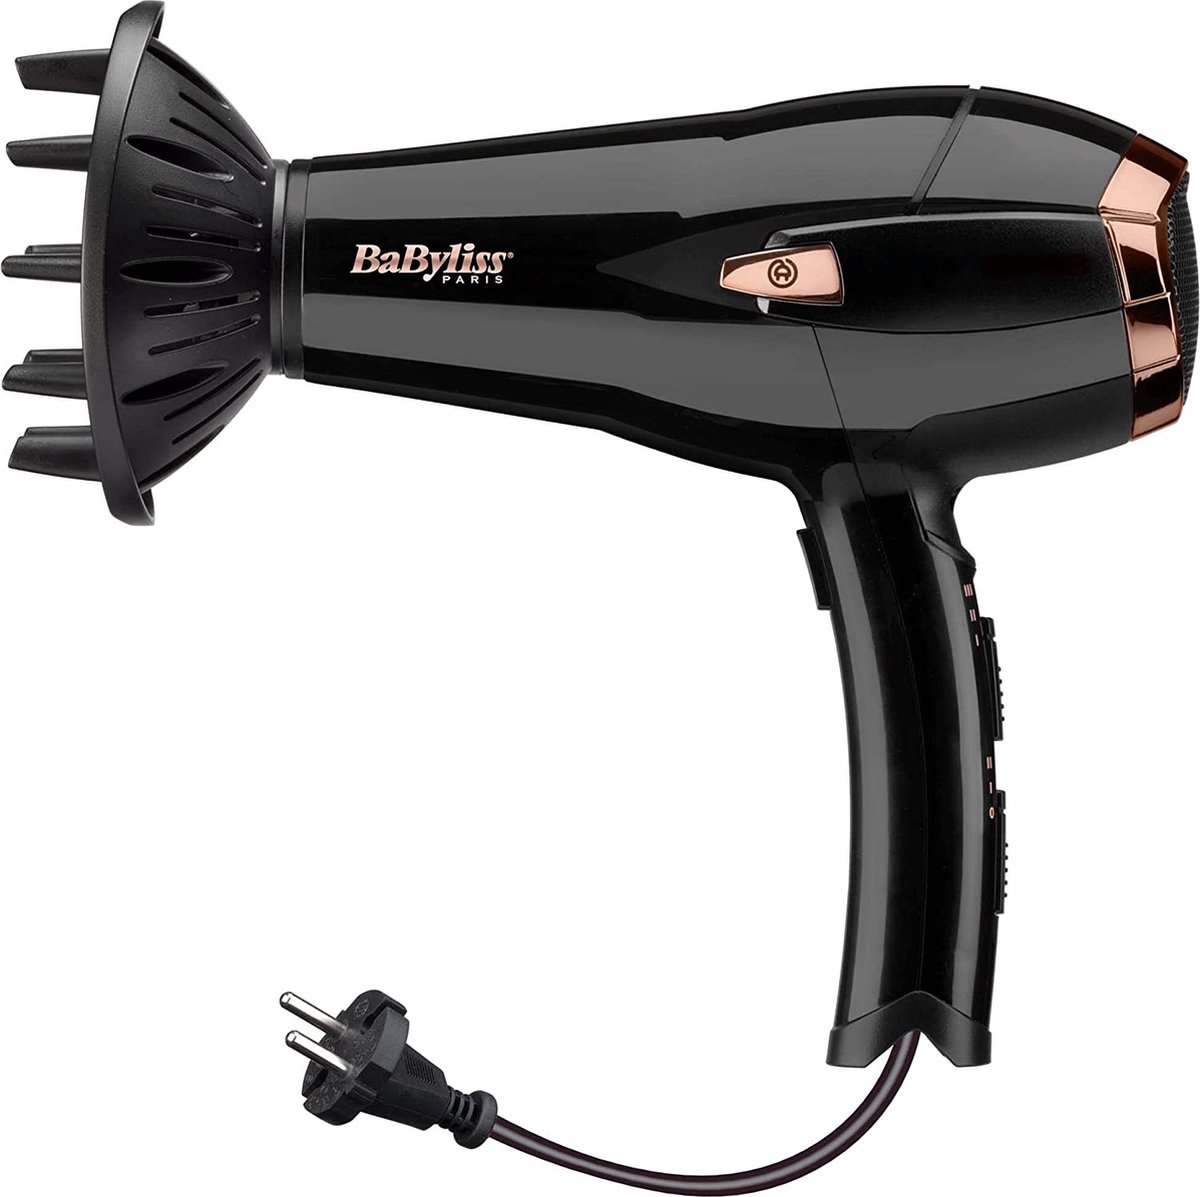 BaByliss D373E Retractable Ionic Hair Dryer DC 2000W Motor, 2 Speed, 3 Temperatures, with Nozzle and Diffuser, Retractable Cable, Black, Light Weight 535 grams